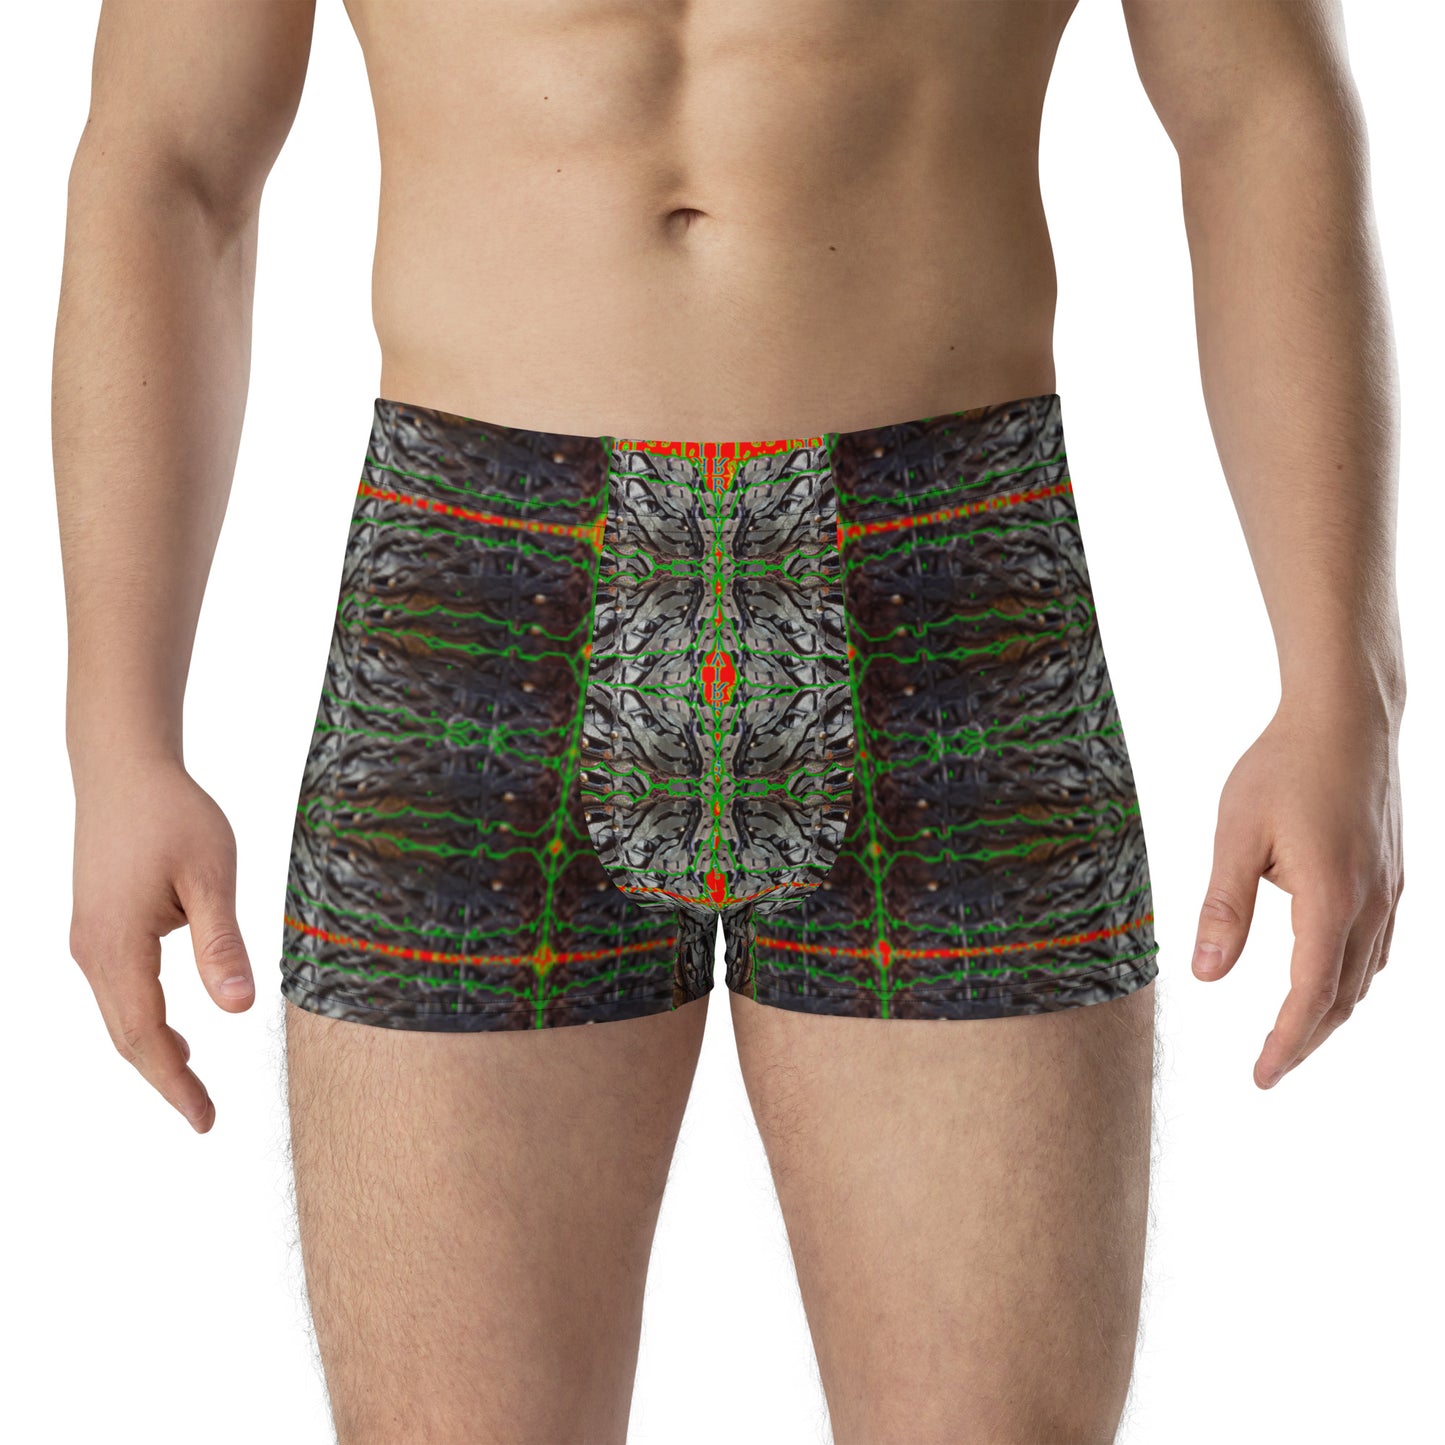 Boxer Briefs (His/They)(Rind#3 Tree Link) RJSTH@Fabric#3 RJSTHW2021 RJS